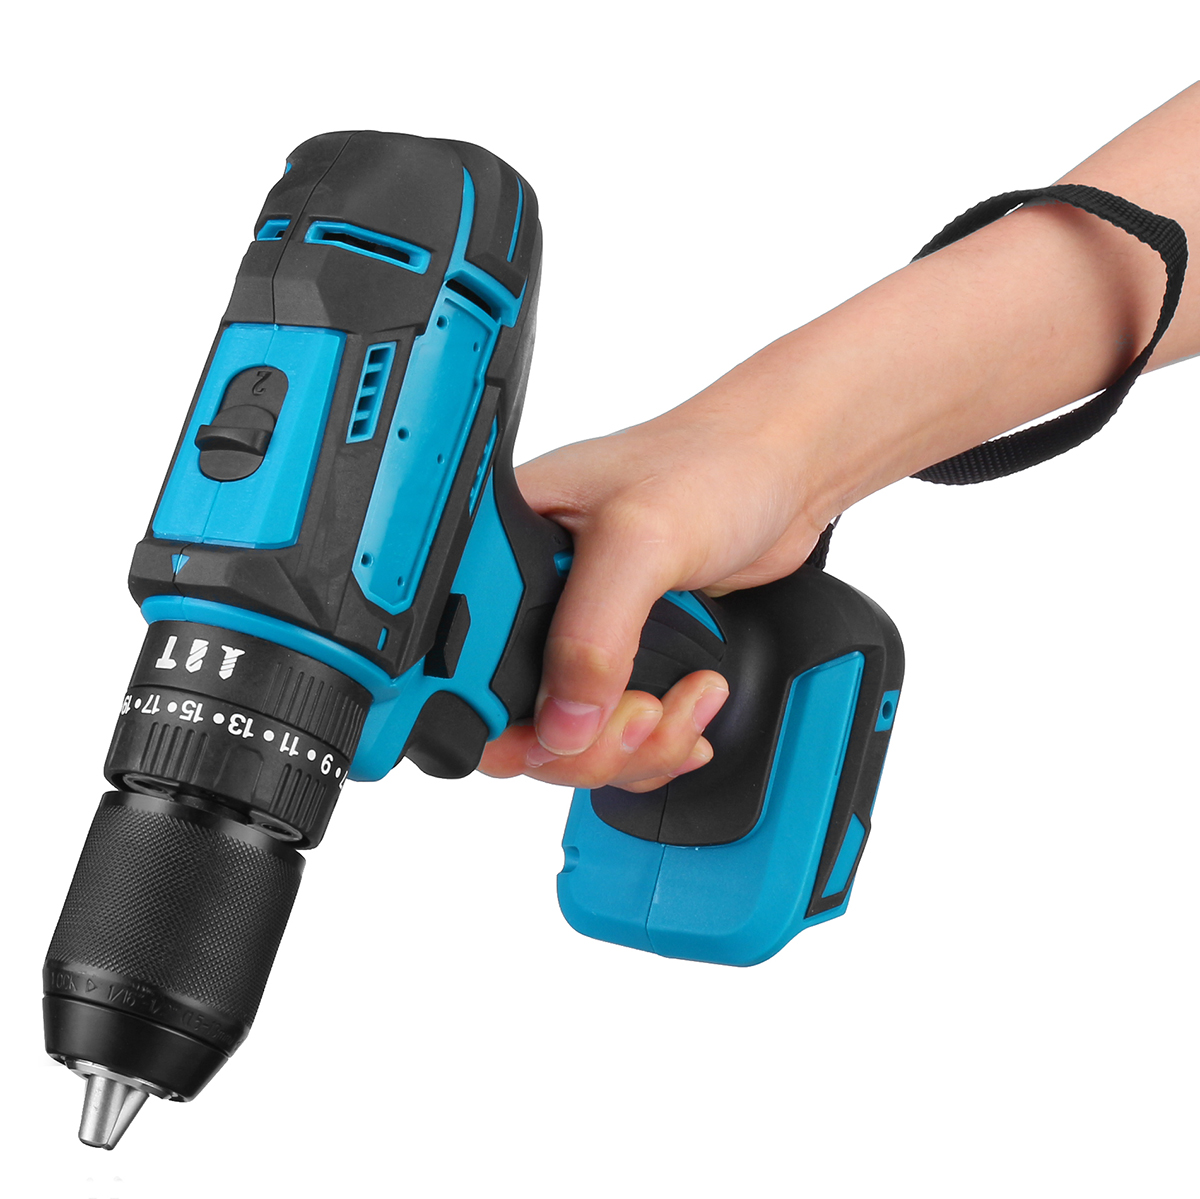 18V-Cordless-Electric-Drill-Driver-Impact-Torque-For-MakitaPower-Tool-1695066-10